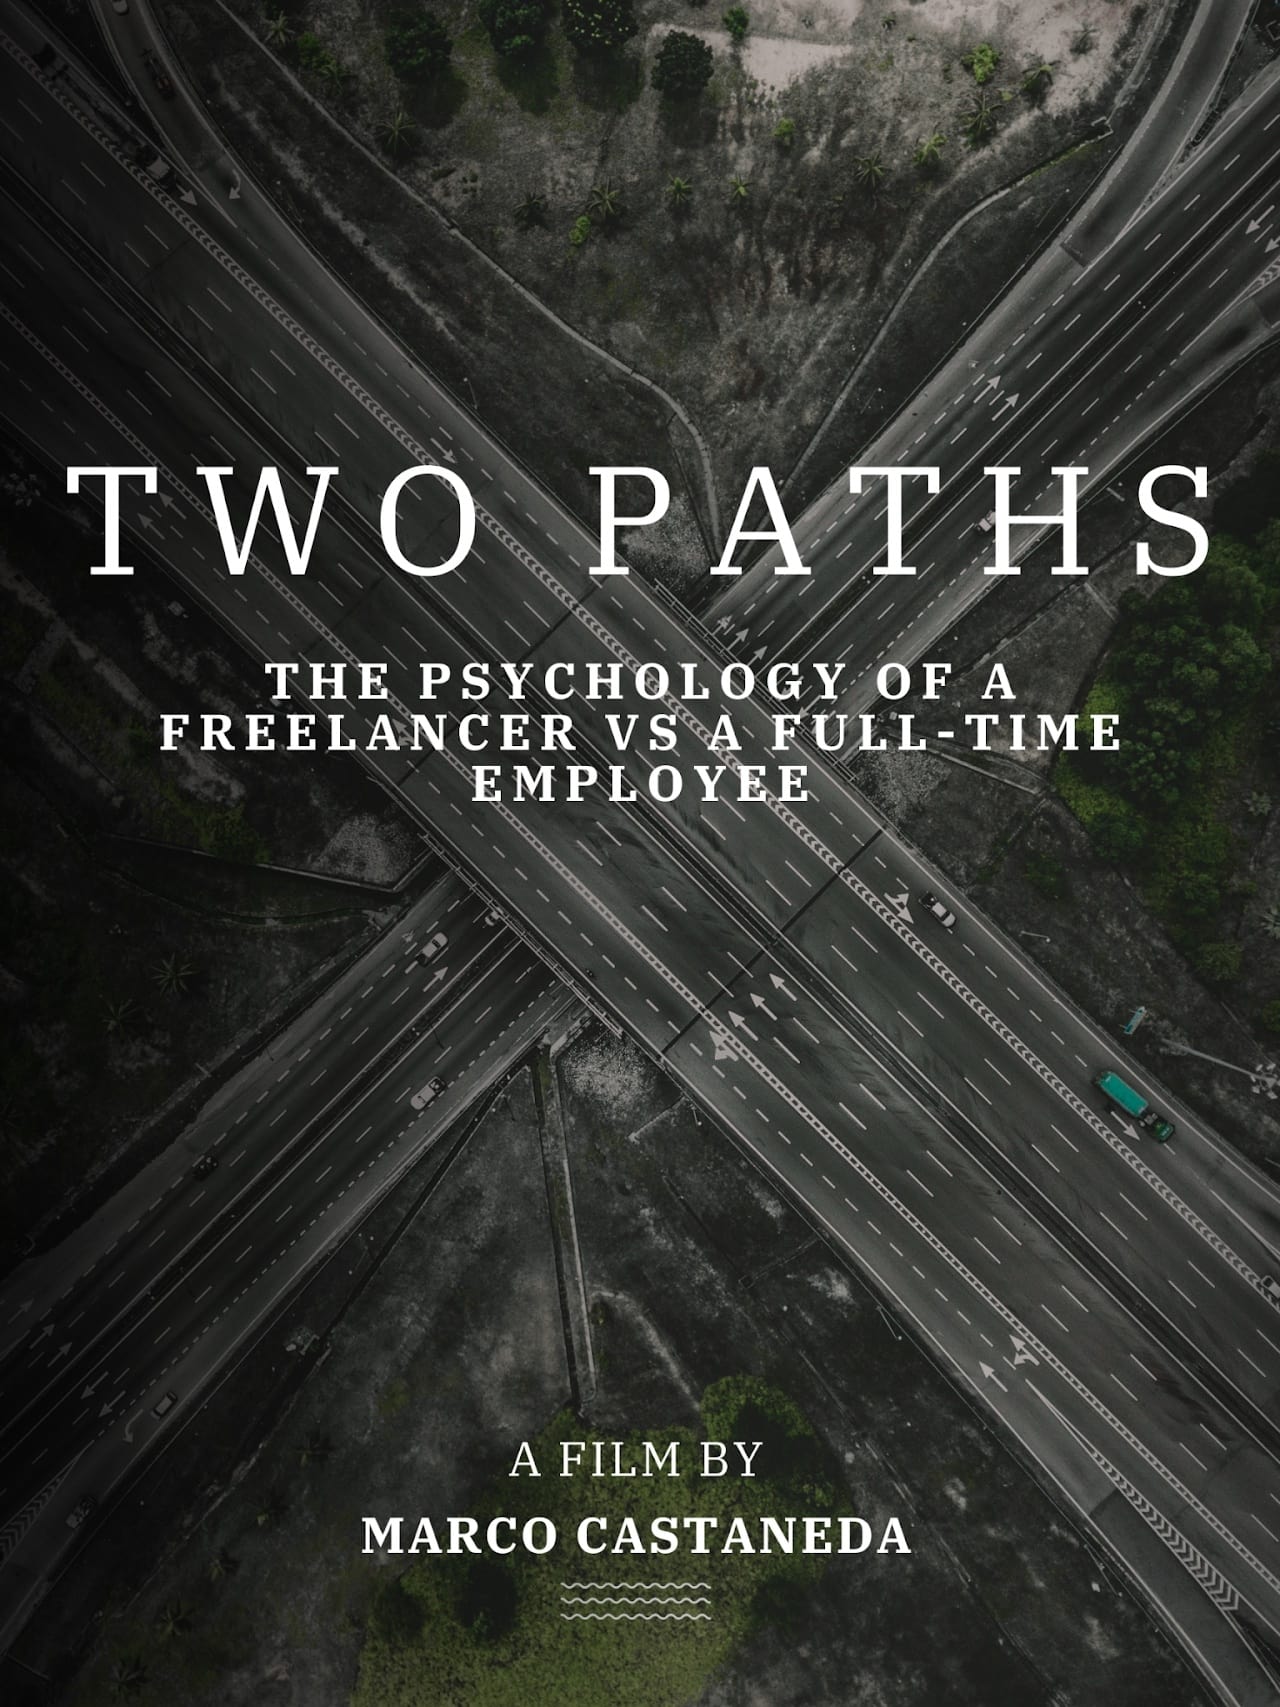 Two Paths: The Psychology of a Freelancer vs a Full-Time Employee